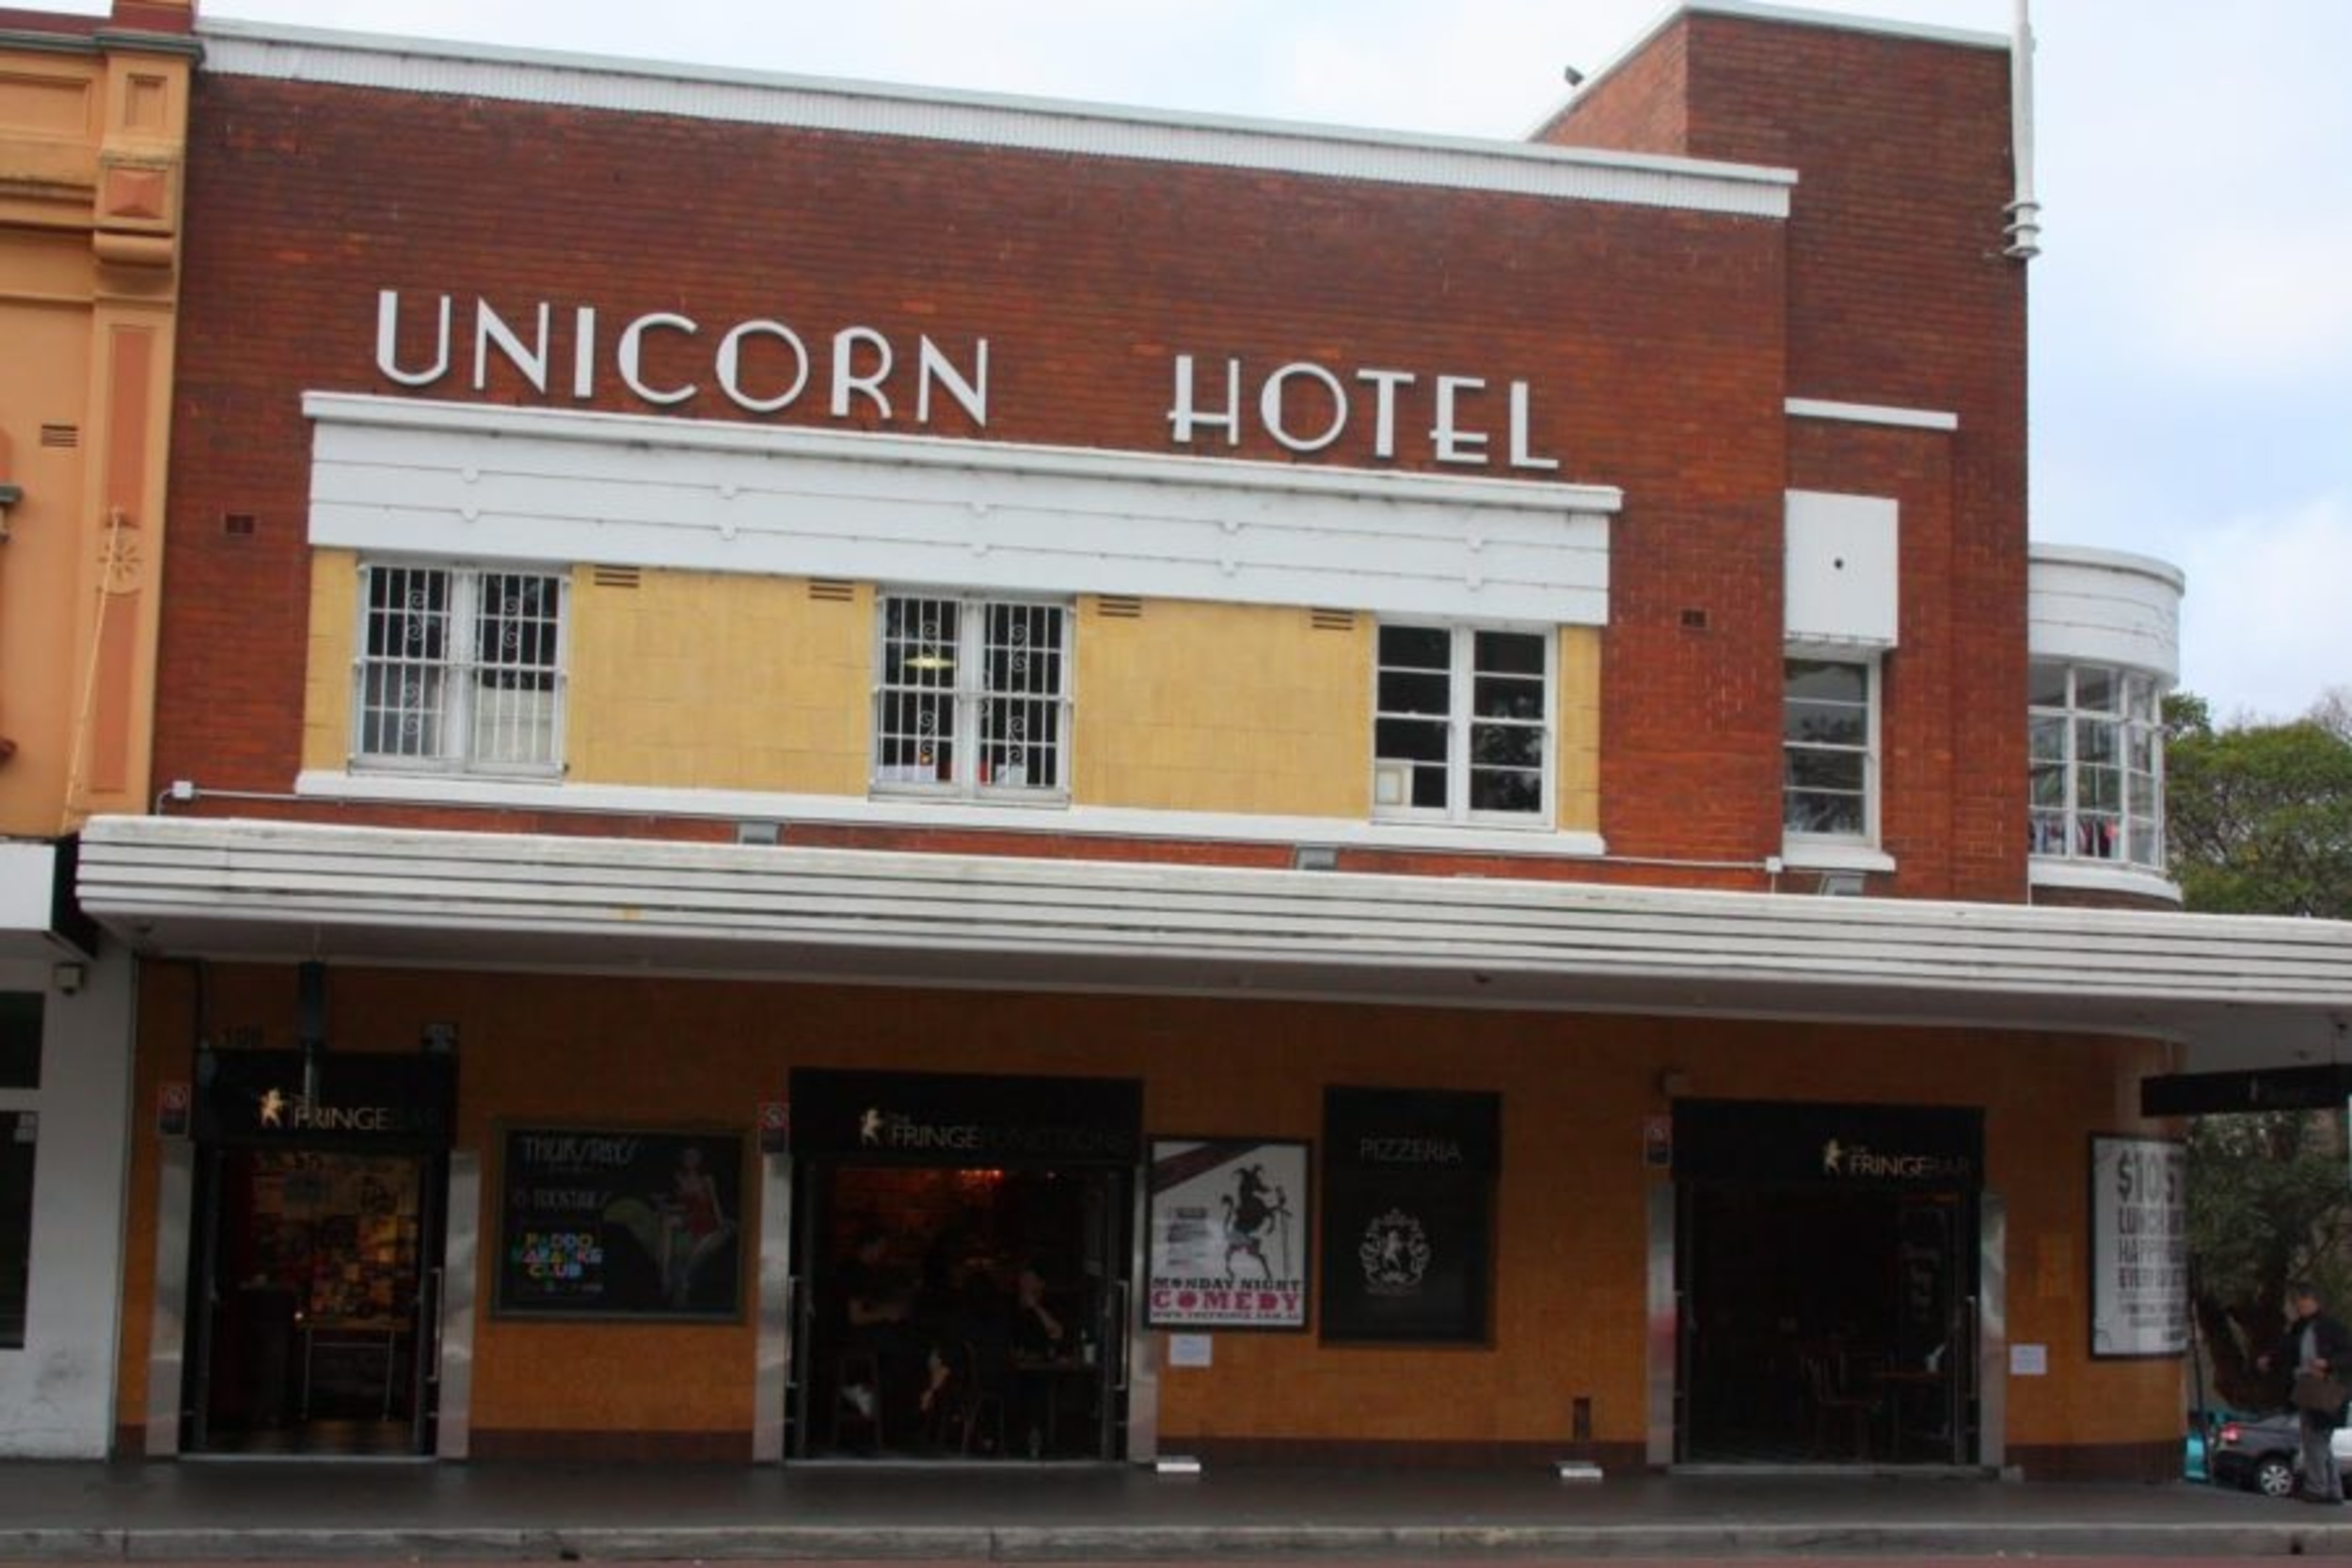 <p>Want some authentic Sydney cuisine? Check out the Unicorn Hotel for a delectable feast of local foods. Along with a vintage interior, the pub offers vintage dishes like schnitzel--a plate doused with divine sauces and crispy chicken.</p><p>You may also like: <a href='https://www.yardbarker.com/lifestyle/articles/20_amazing_snowy_us_getaways_for_your_winter_escape/s1__39733980'>20 amazing snowy US getaways for your winter escape</a></p>